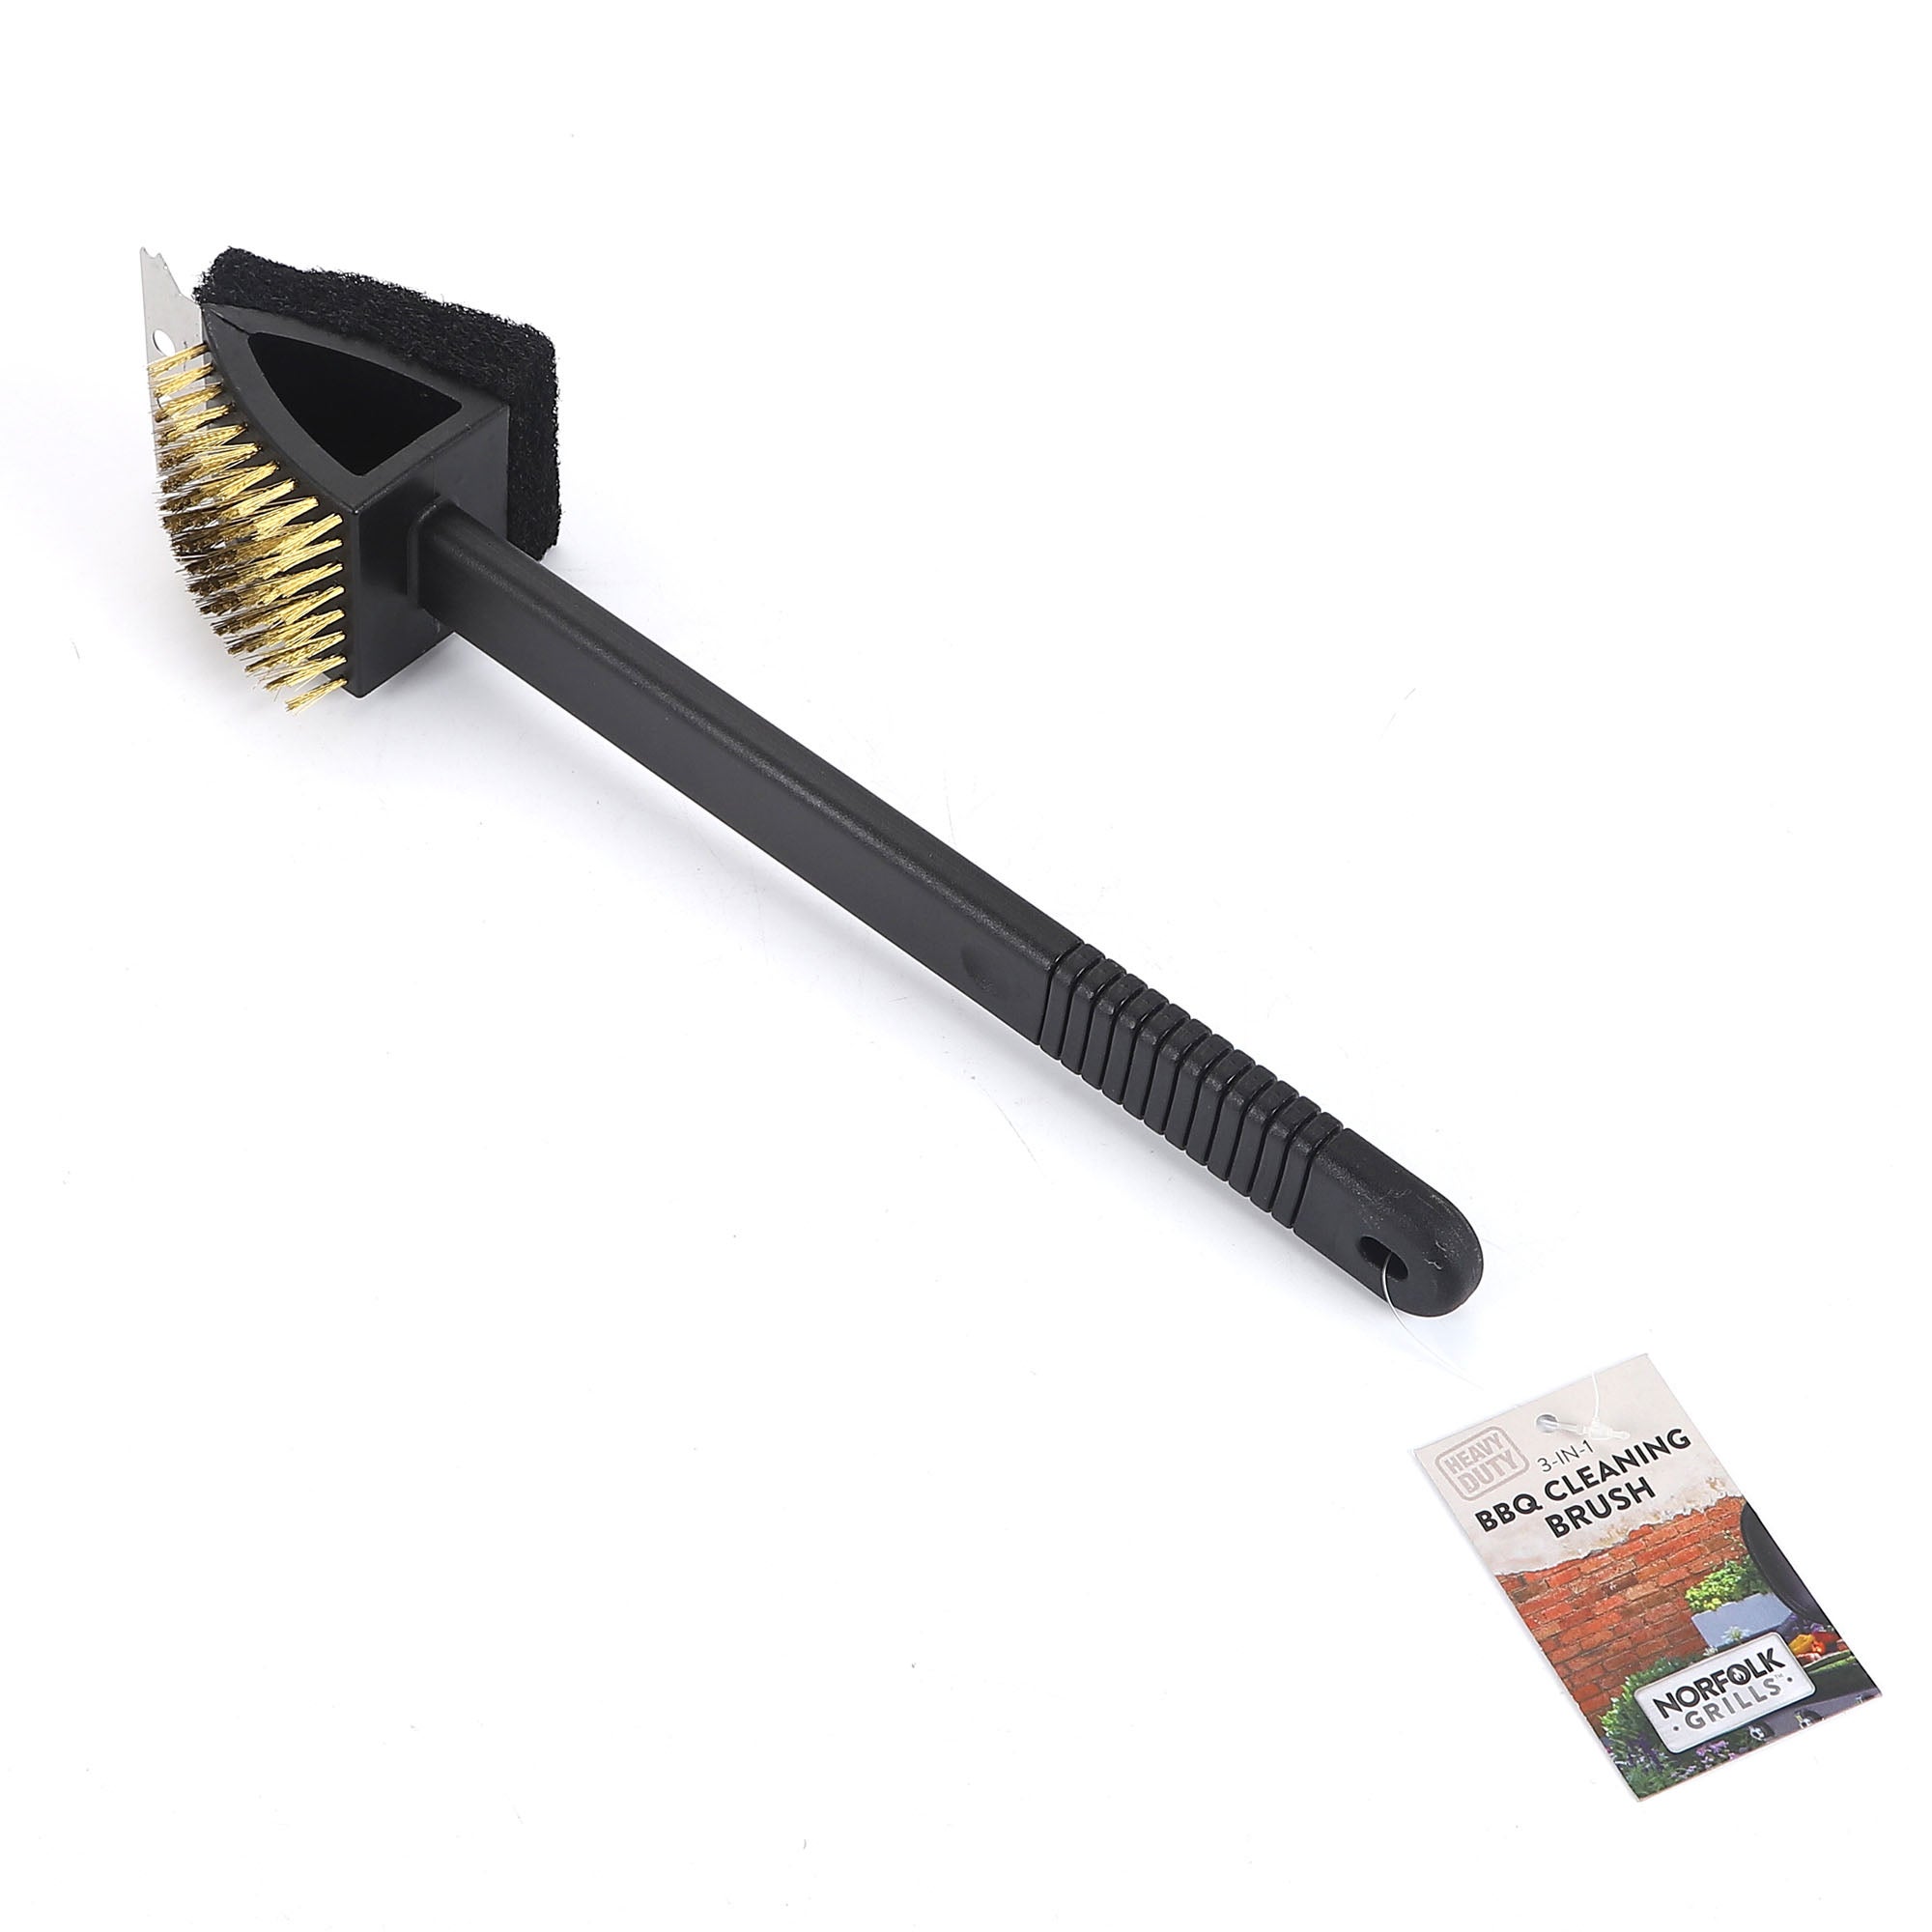 Norfolk Grills 3 in 1 Grill Cleaning Brush